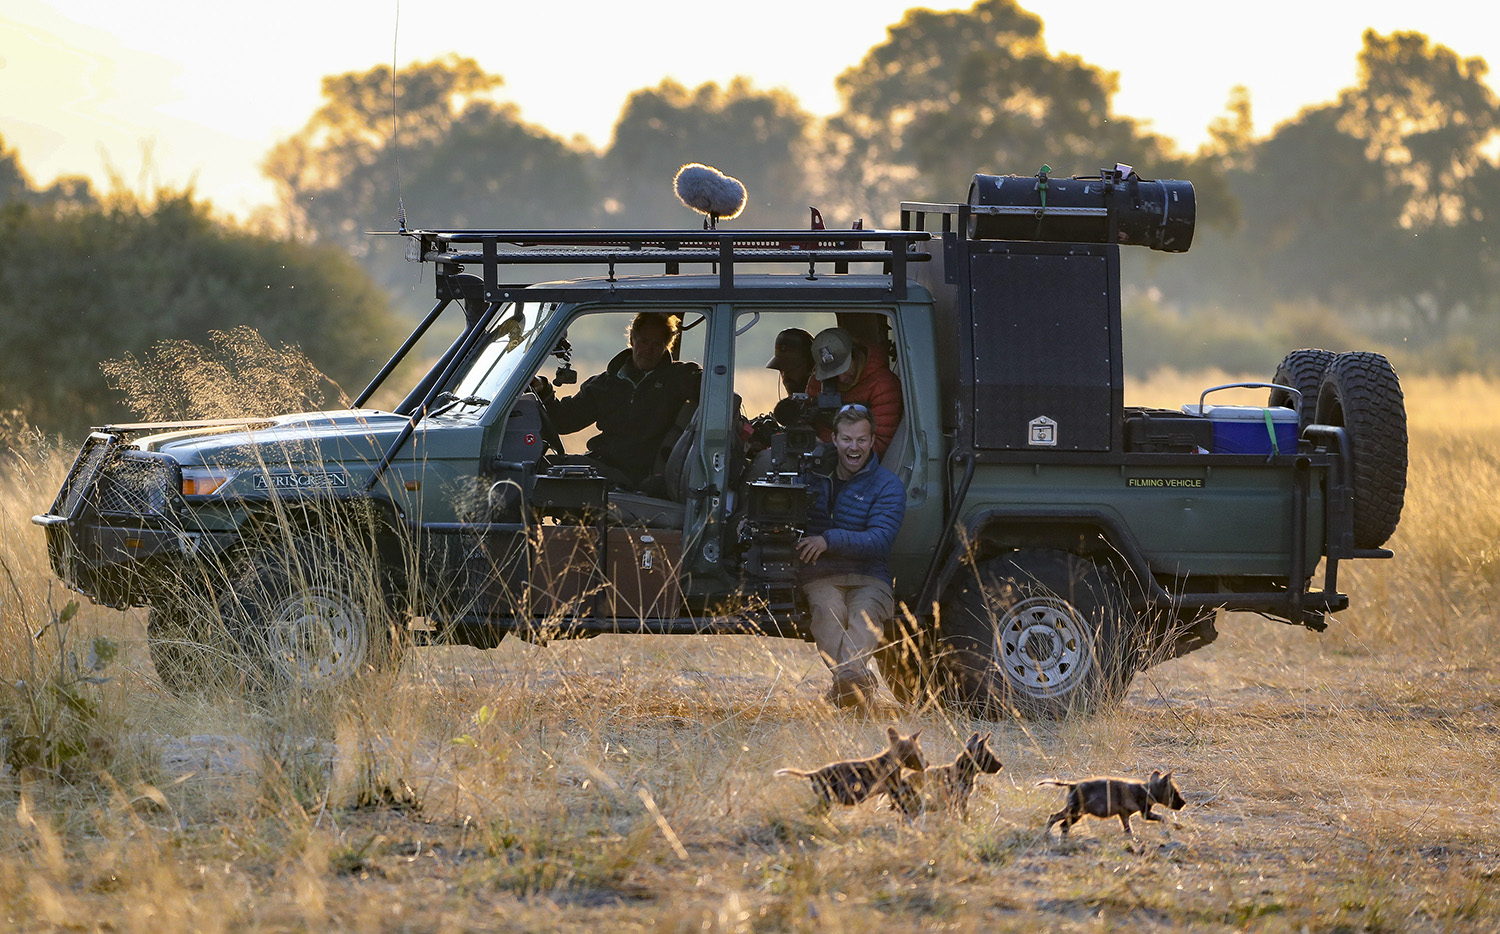 Bertie Gregory sitting on the side of the 4-wheel drive vehicle as three wild dog pups scamper past.